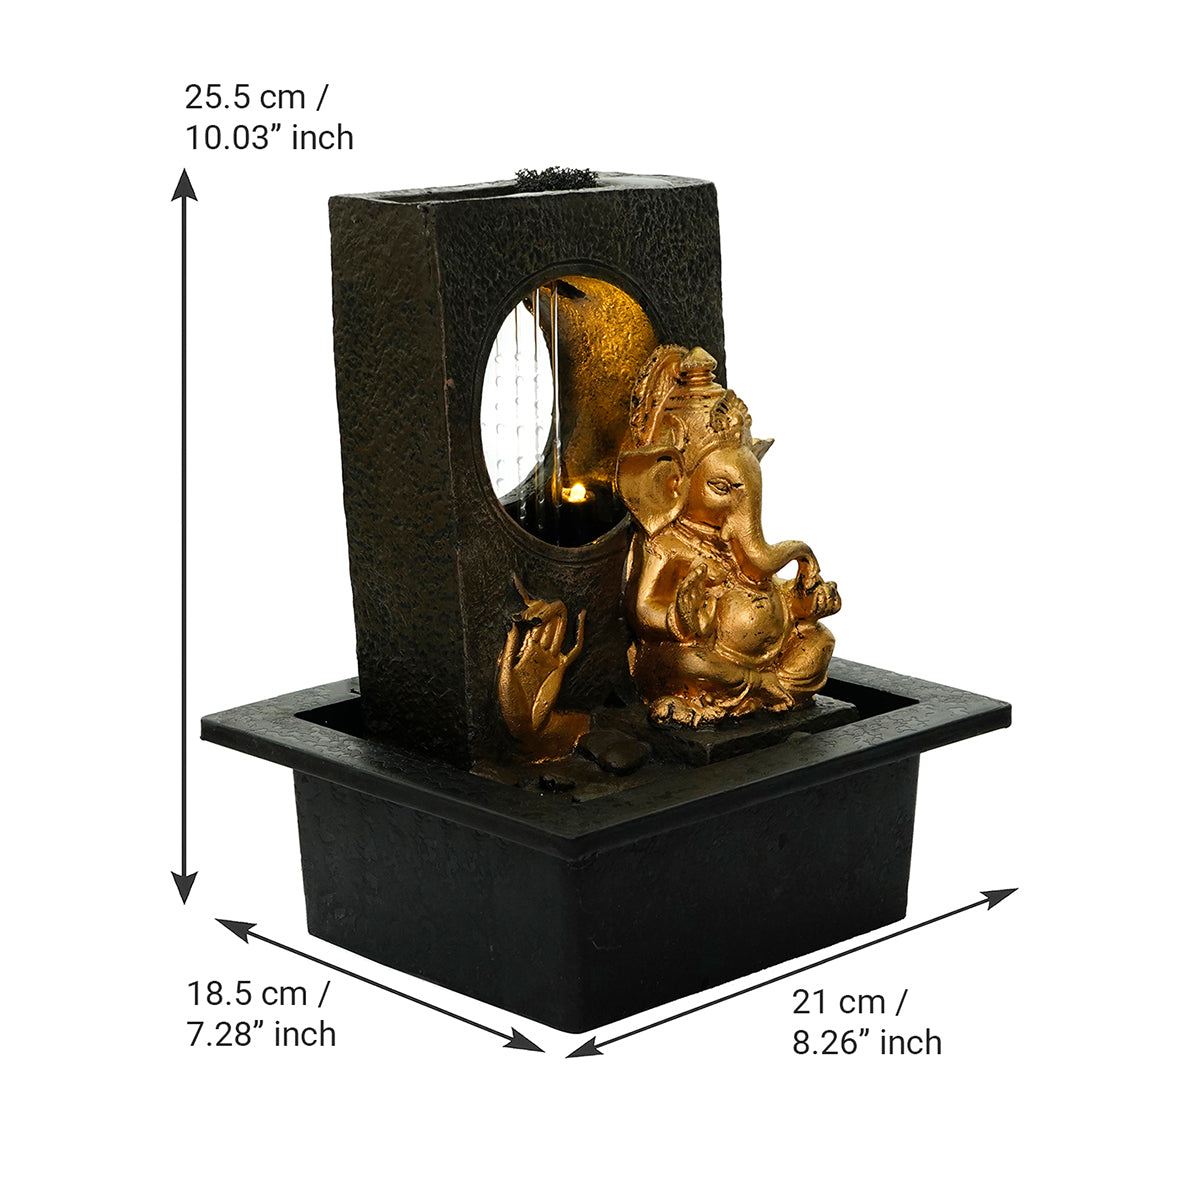 Polystone Black and Golden Lord Ganesha Statue Water Fountain With Light Home/Office Decor 2